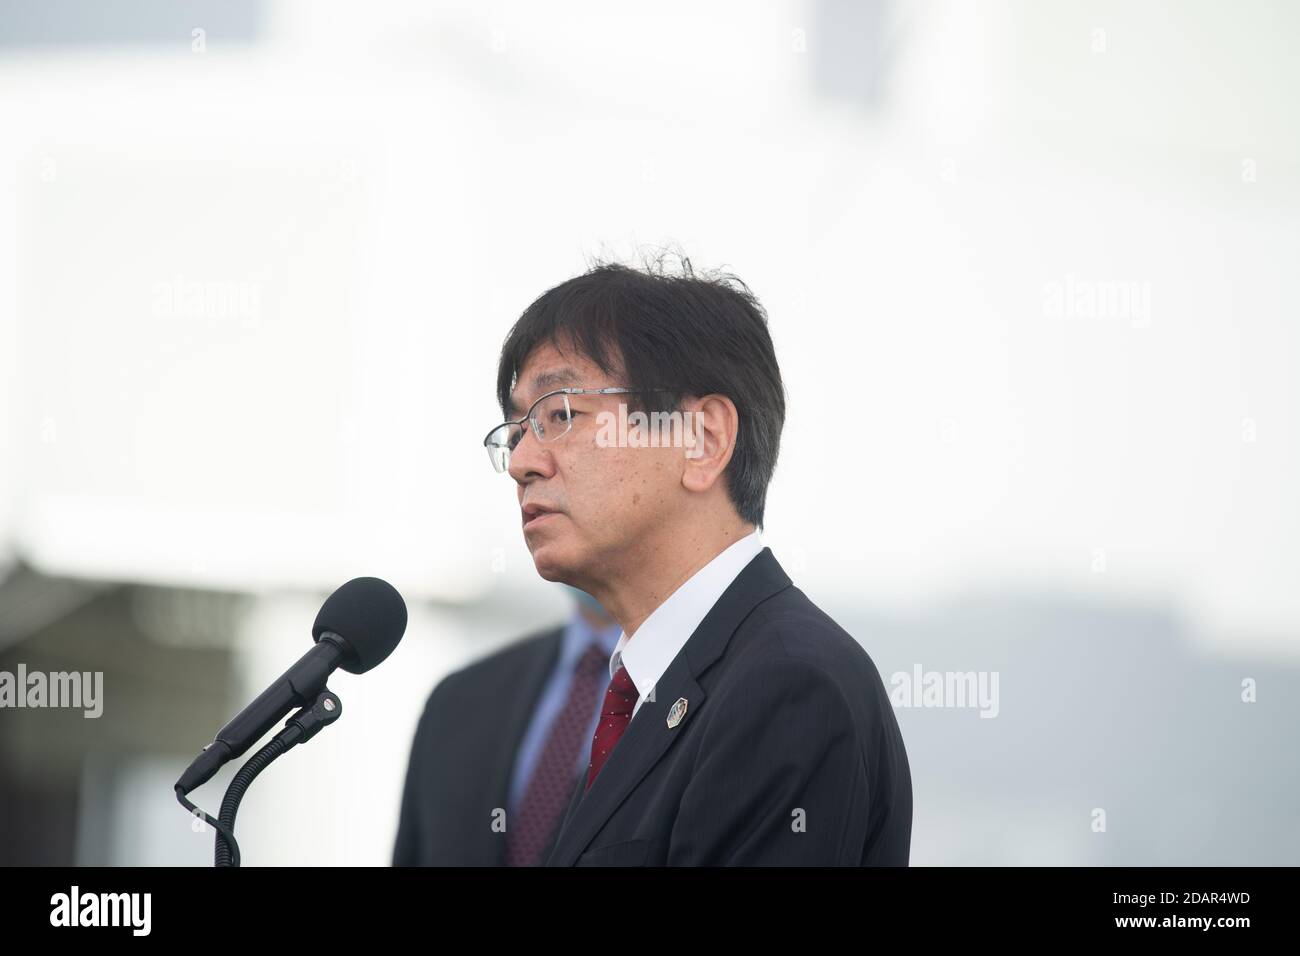 Hiroshi Sasaki, vice president and director general of the Japan Aerospace Exploration Agency Human Spaceflight Technology Directorate, speaks to members of the media during a press conference ahead of the Crew-1 launch at the Kennedy Space Center November 13, 2020 in Cape Canaveral, Florida. Stock Photo